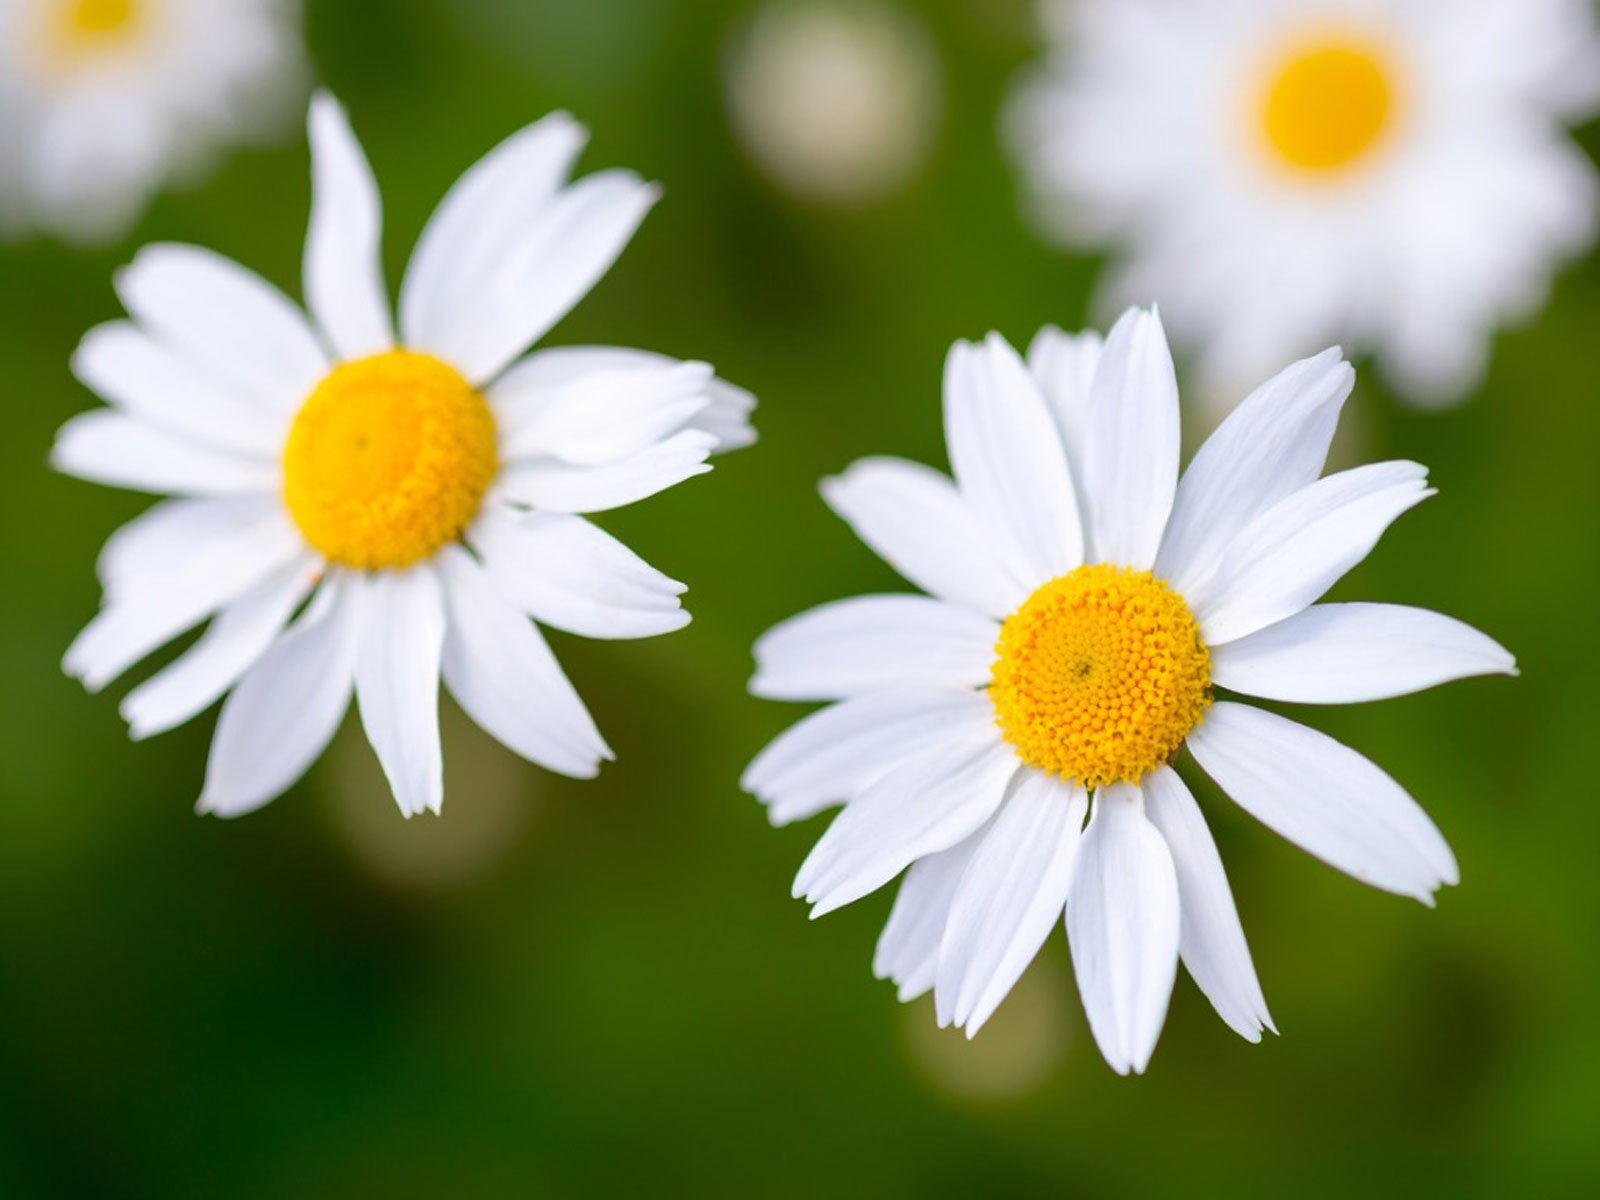 Different Types Of Daisies: Learn About The Differences Between Daisies